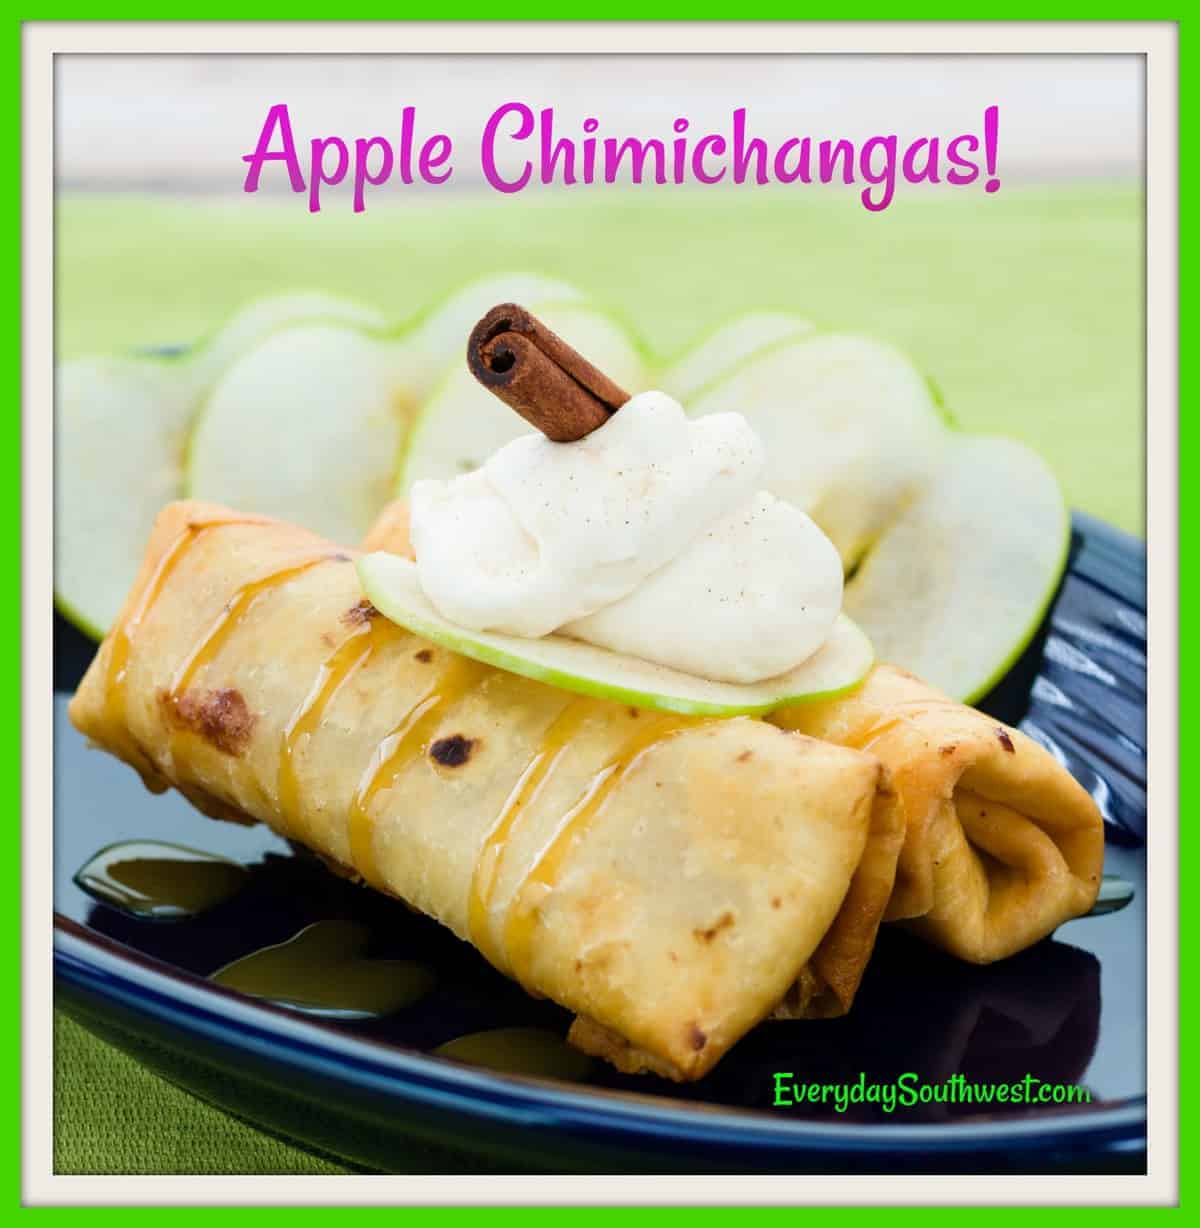 Baked Chicken Chimichangas Recipe (+VIDEO) - The Girl Who Ate Everything